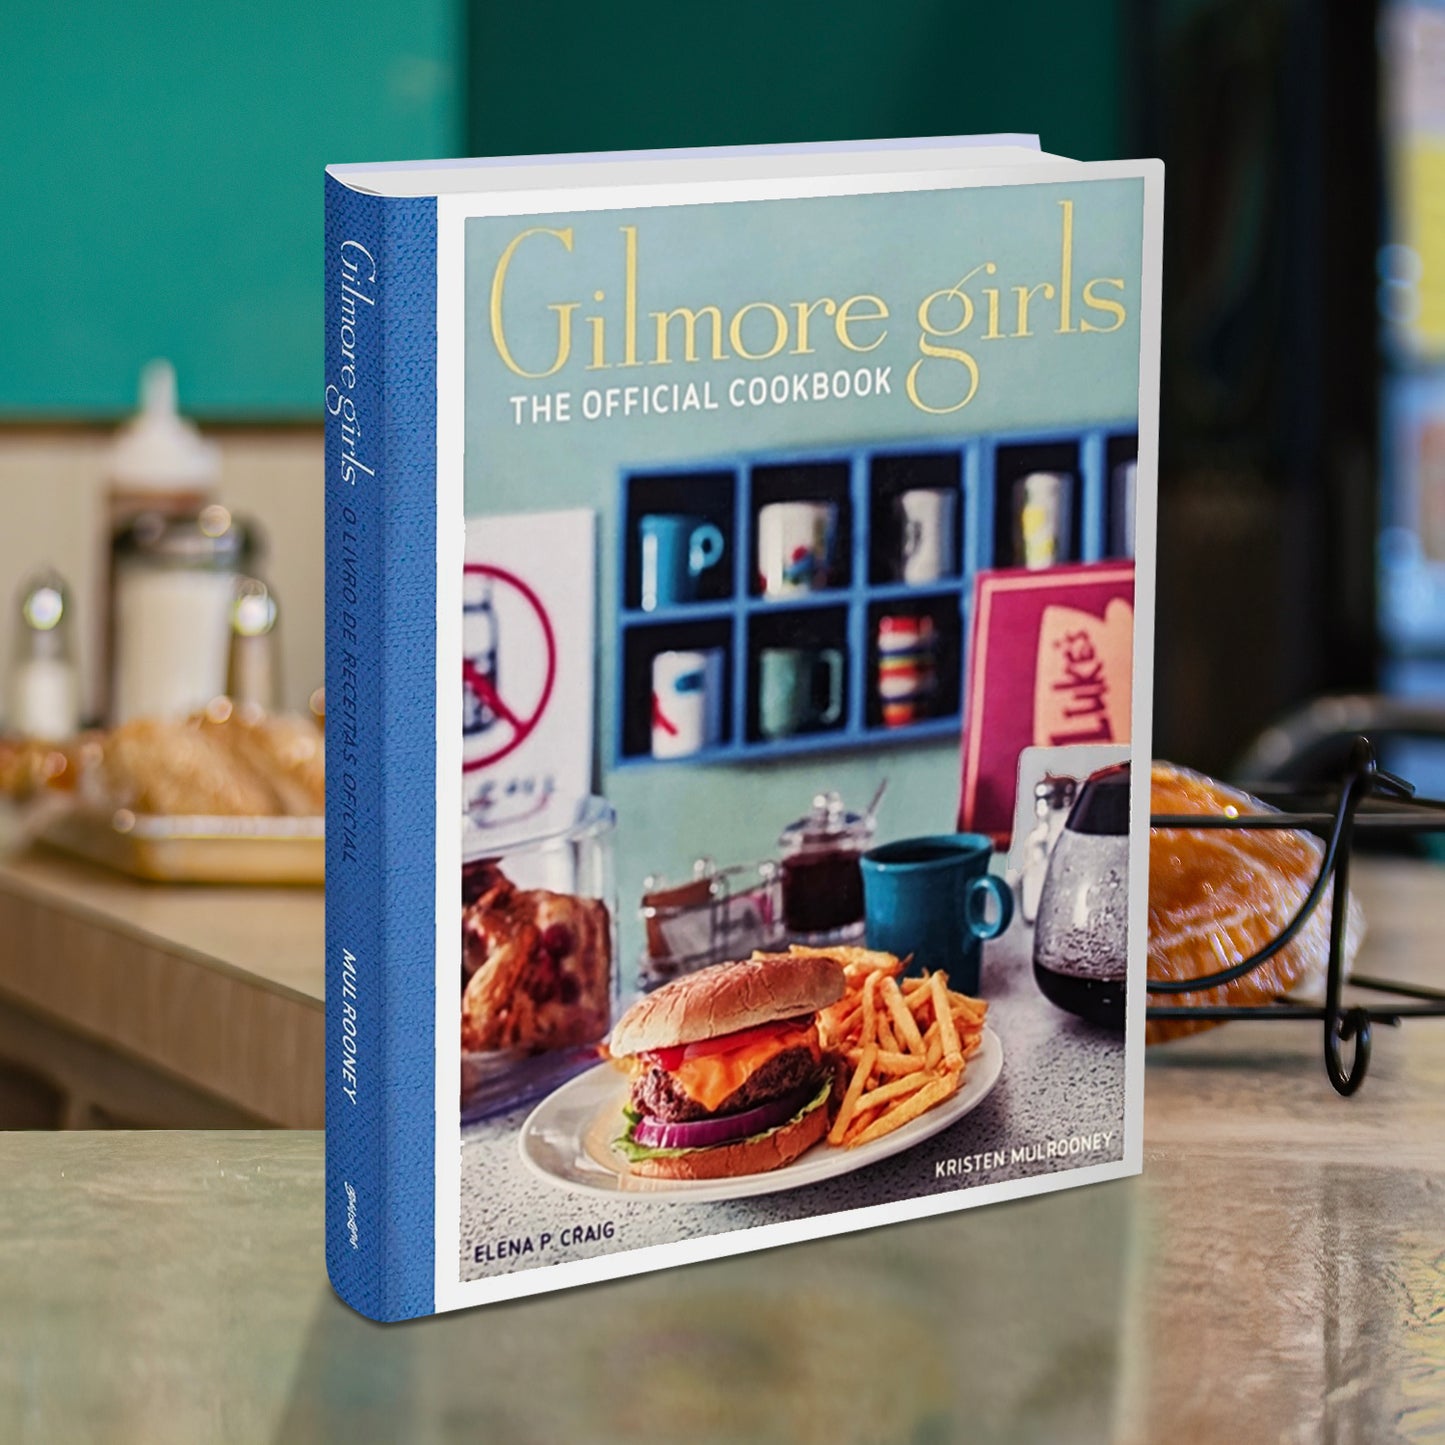 A mint green cookbook with a blue spine set against a vintage diner counter. The book cover reads "Gilmore Girls: The Official Cookbook" and features a plate of burgers and fries sitting in a vintage-style diner.